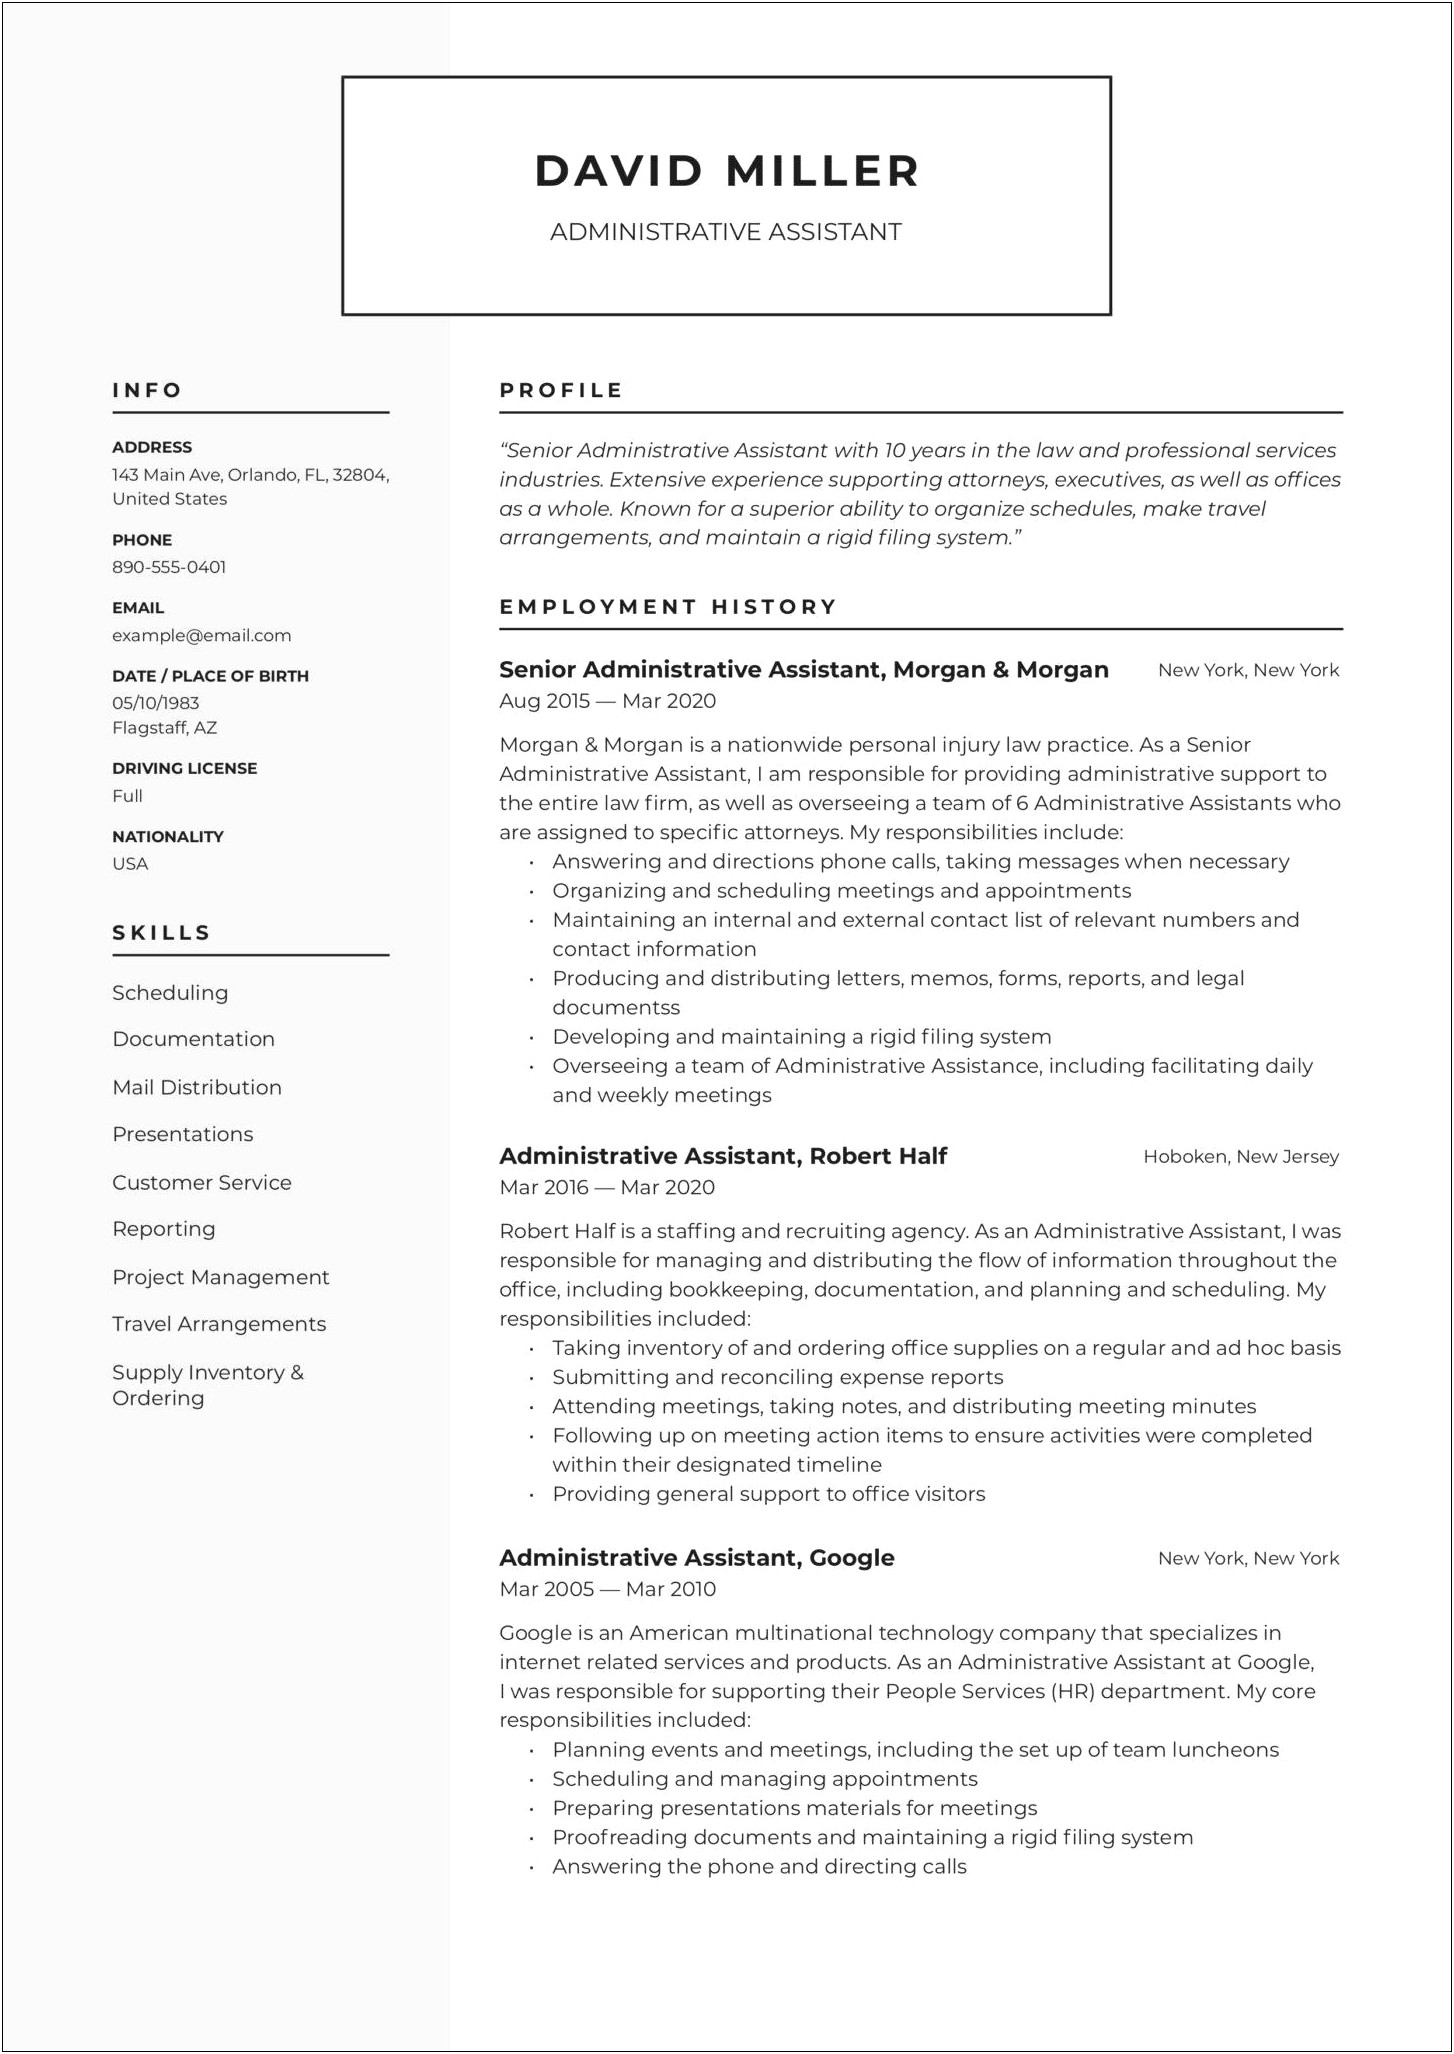 Sample Resume For Administrative Assistant In Canada